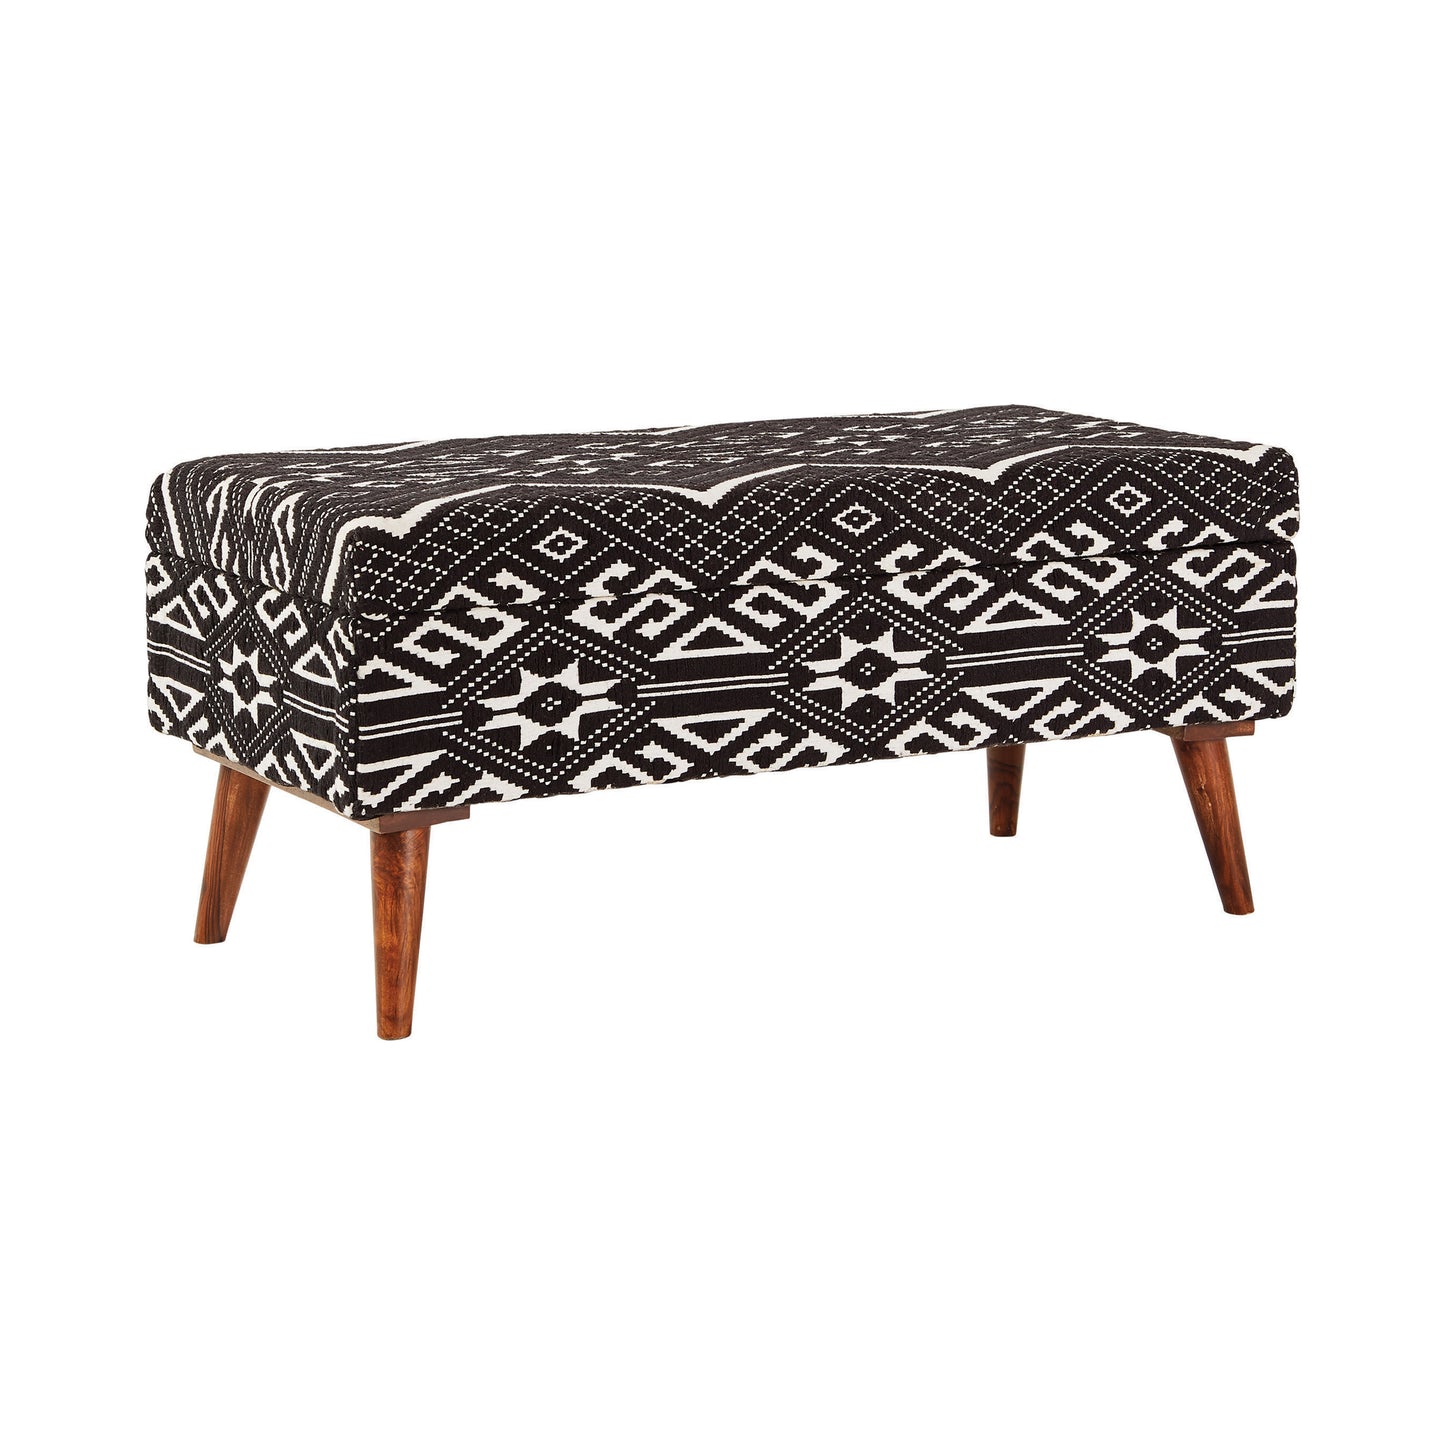 Upholstered Storage Bench Black and White